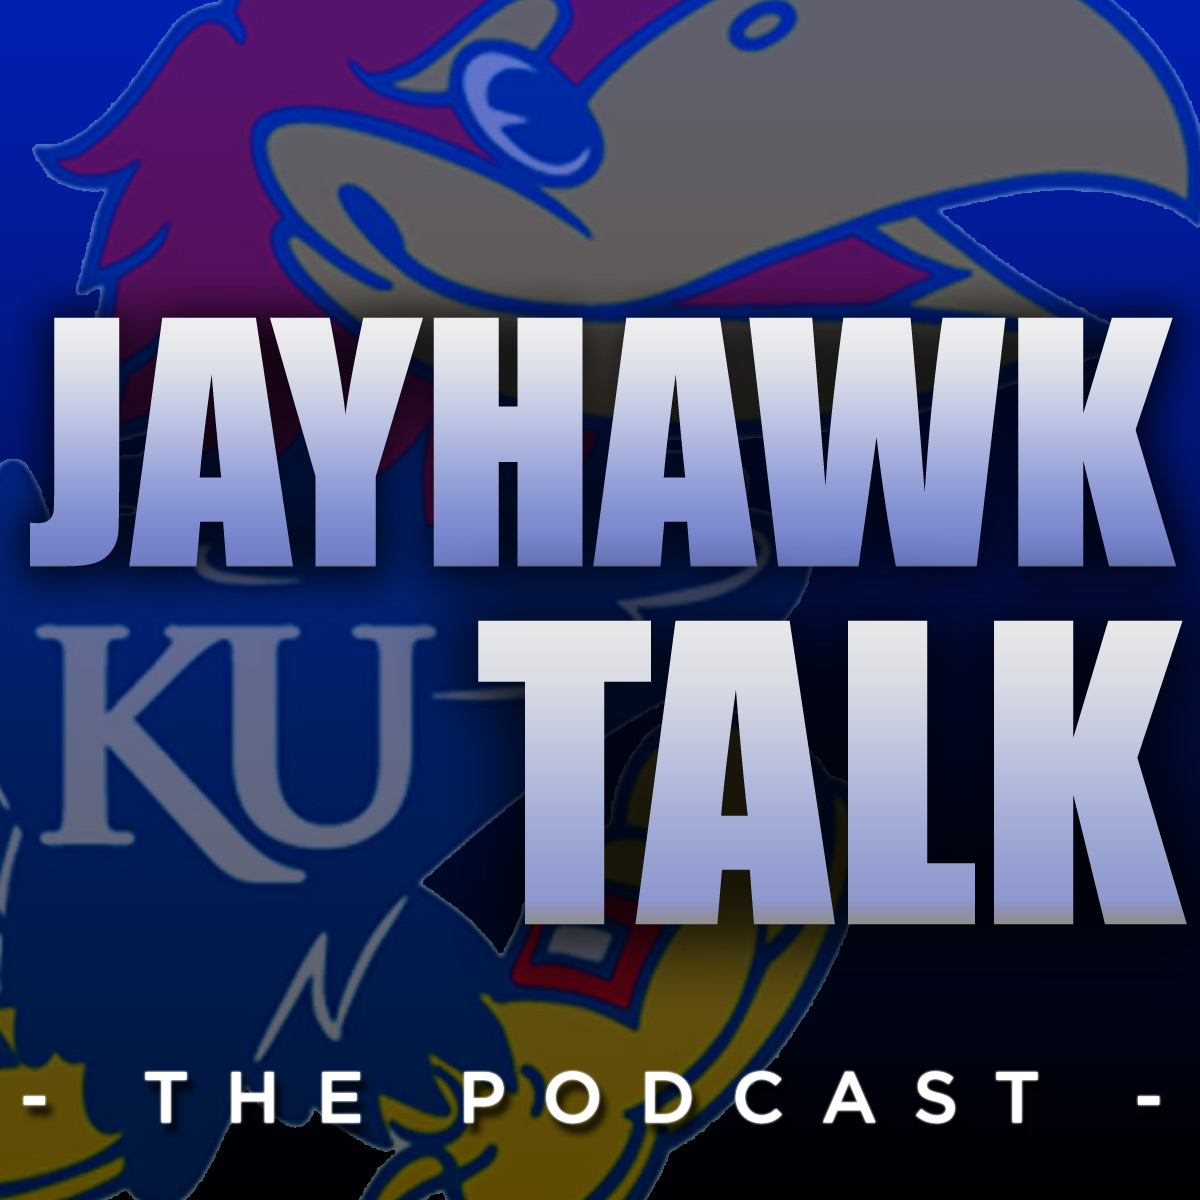 Episode 15 - KUvOSU postgame, Big 12 race, and Swag, (Special Guest Tim Dwyer)